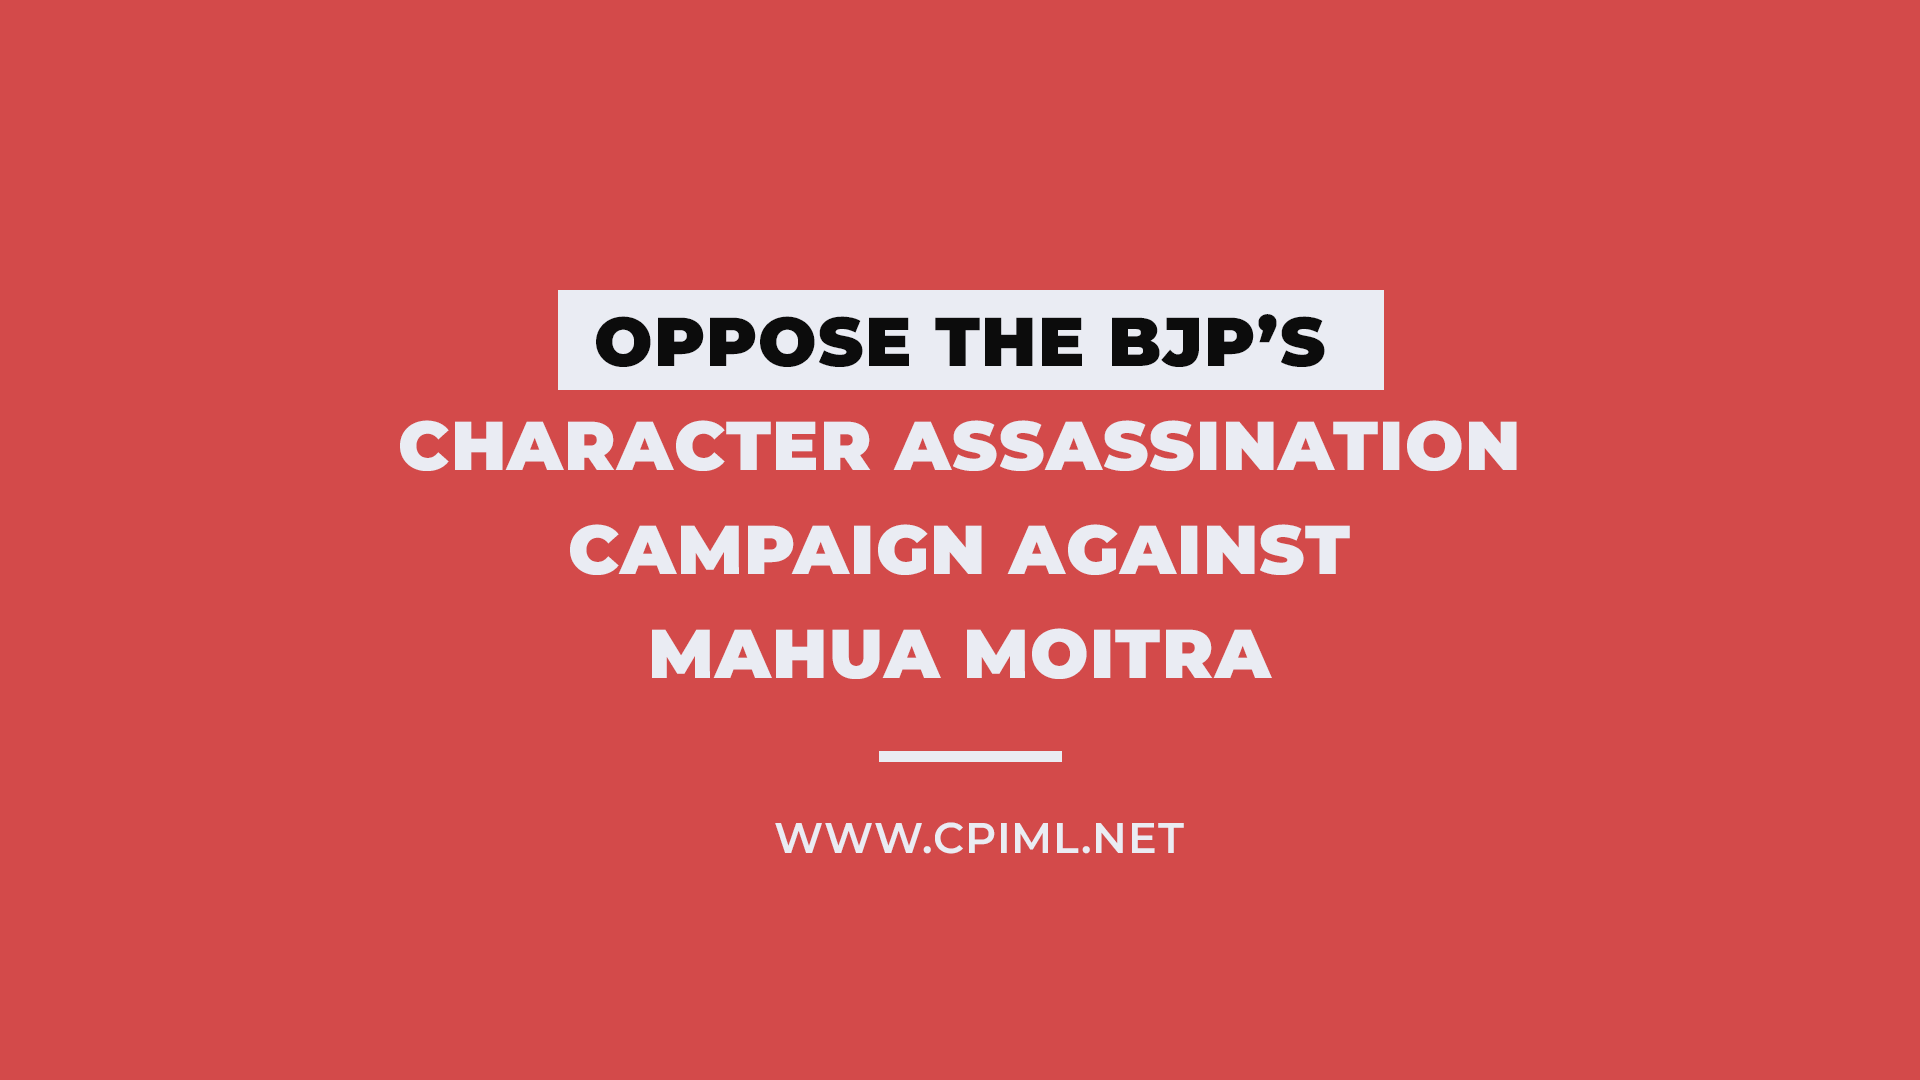 Oppose the BJP’s Character Assassination Campaign against Mahua Moitra